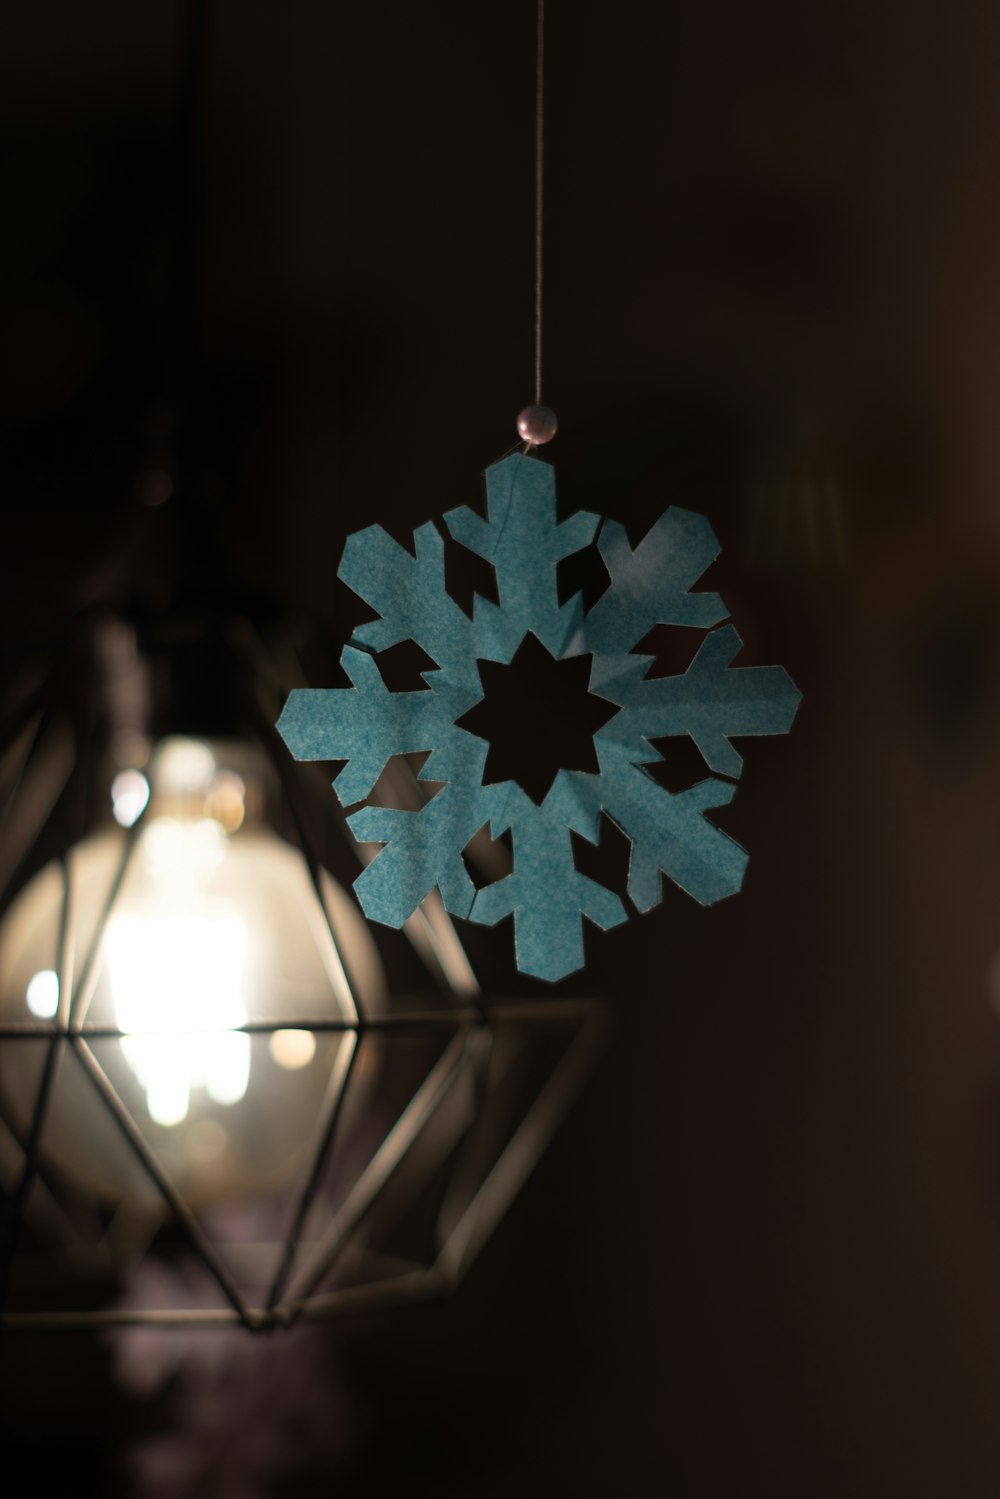 a snowflake ornament hanging from a light fixture